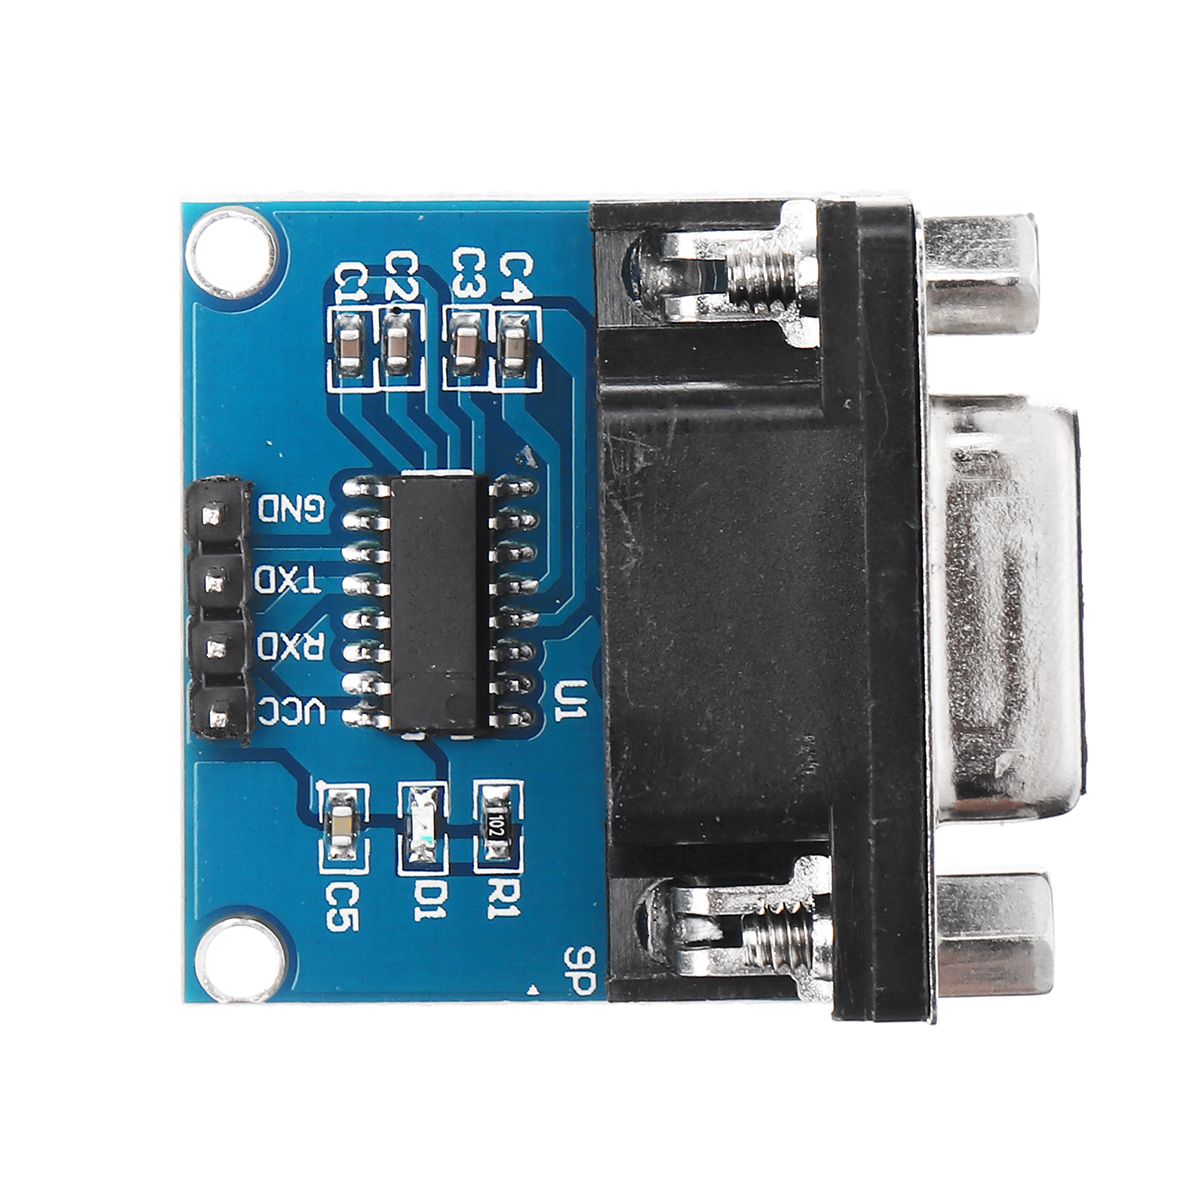 10pcs-RS232-to-TTL-Serial-Port-Converter-Module-DB9-Connector-MAX3232-Serial-Module-1527327